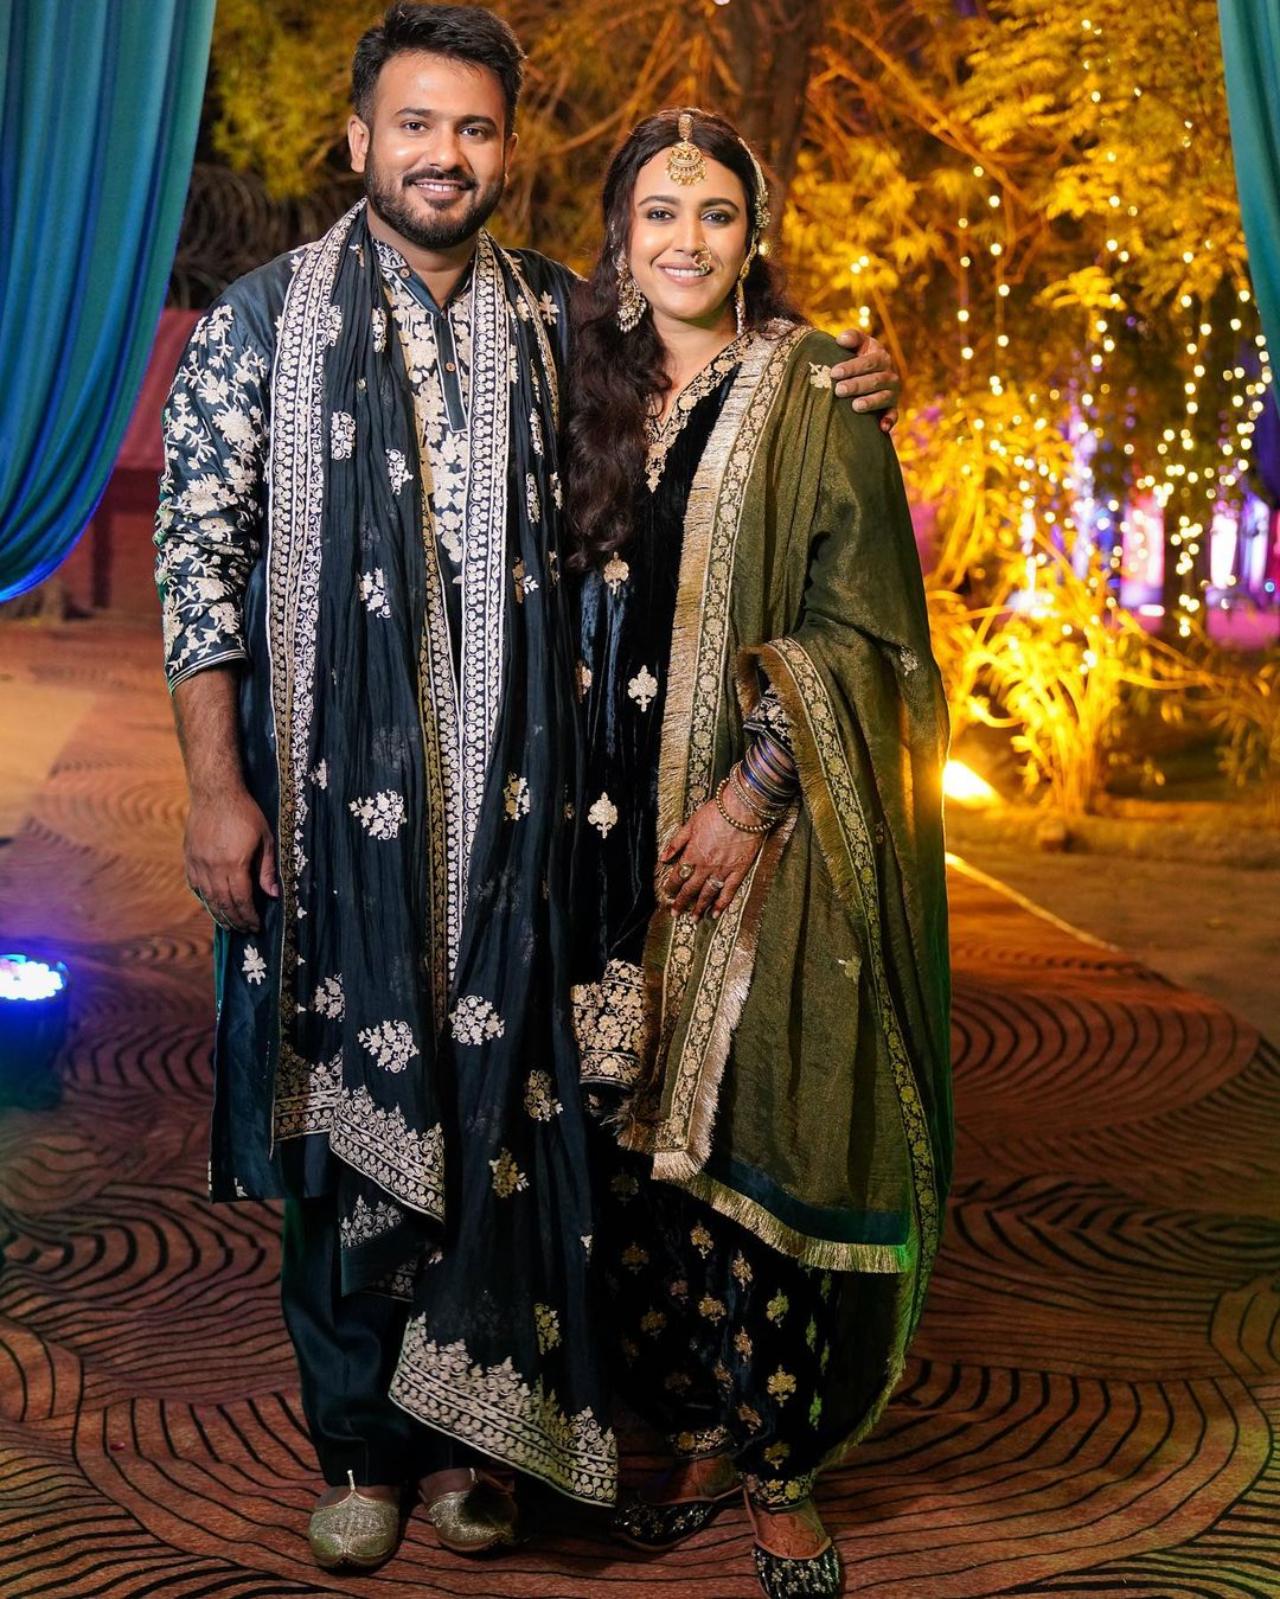 The 'Nil Battey Sannata' star has been sharing beautiful photos from her Instagram story. Several photos from Swara and Fahad's ceremony have now gone viral on social media platforms.